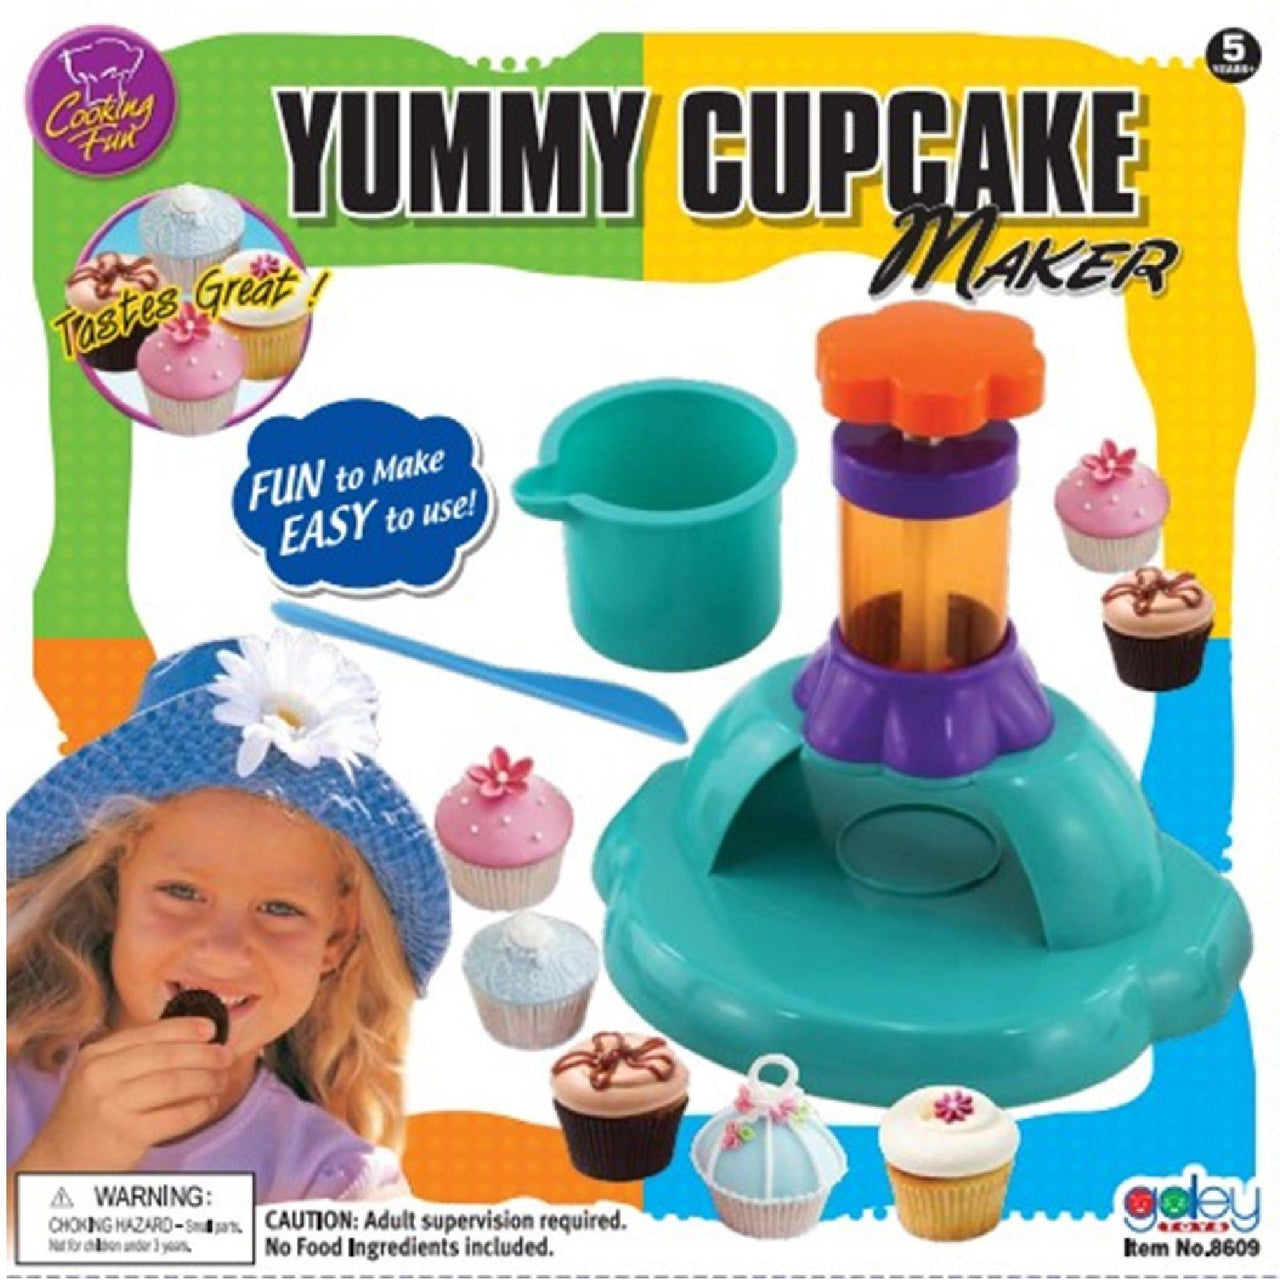 Galey Yummy Cup Cake Maker